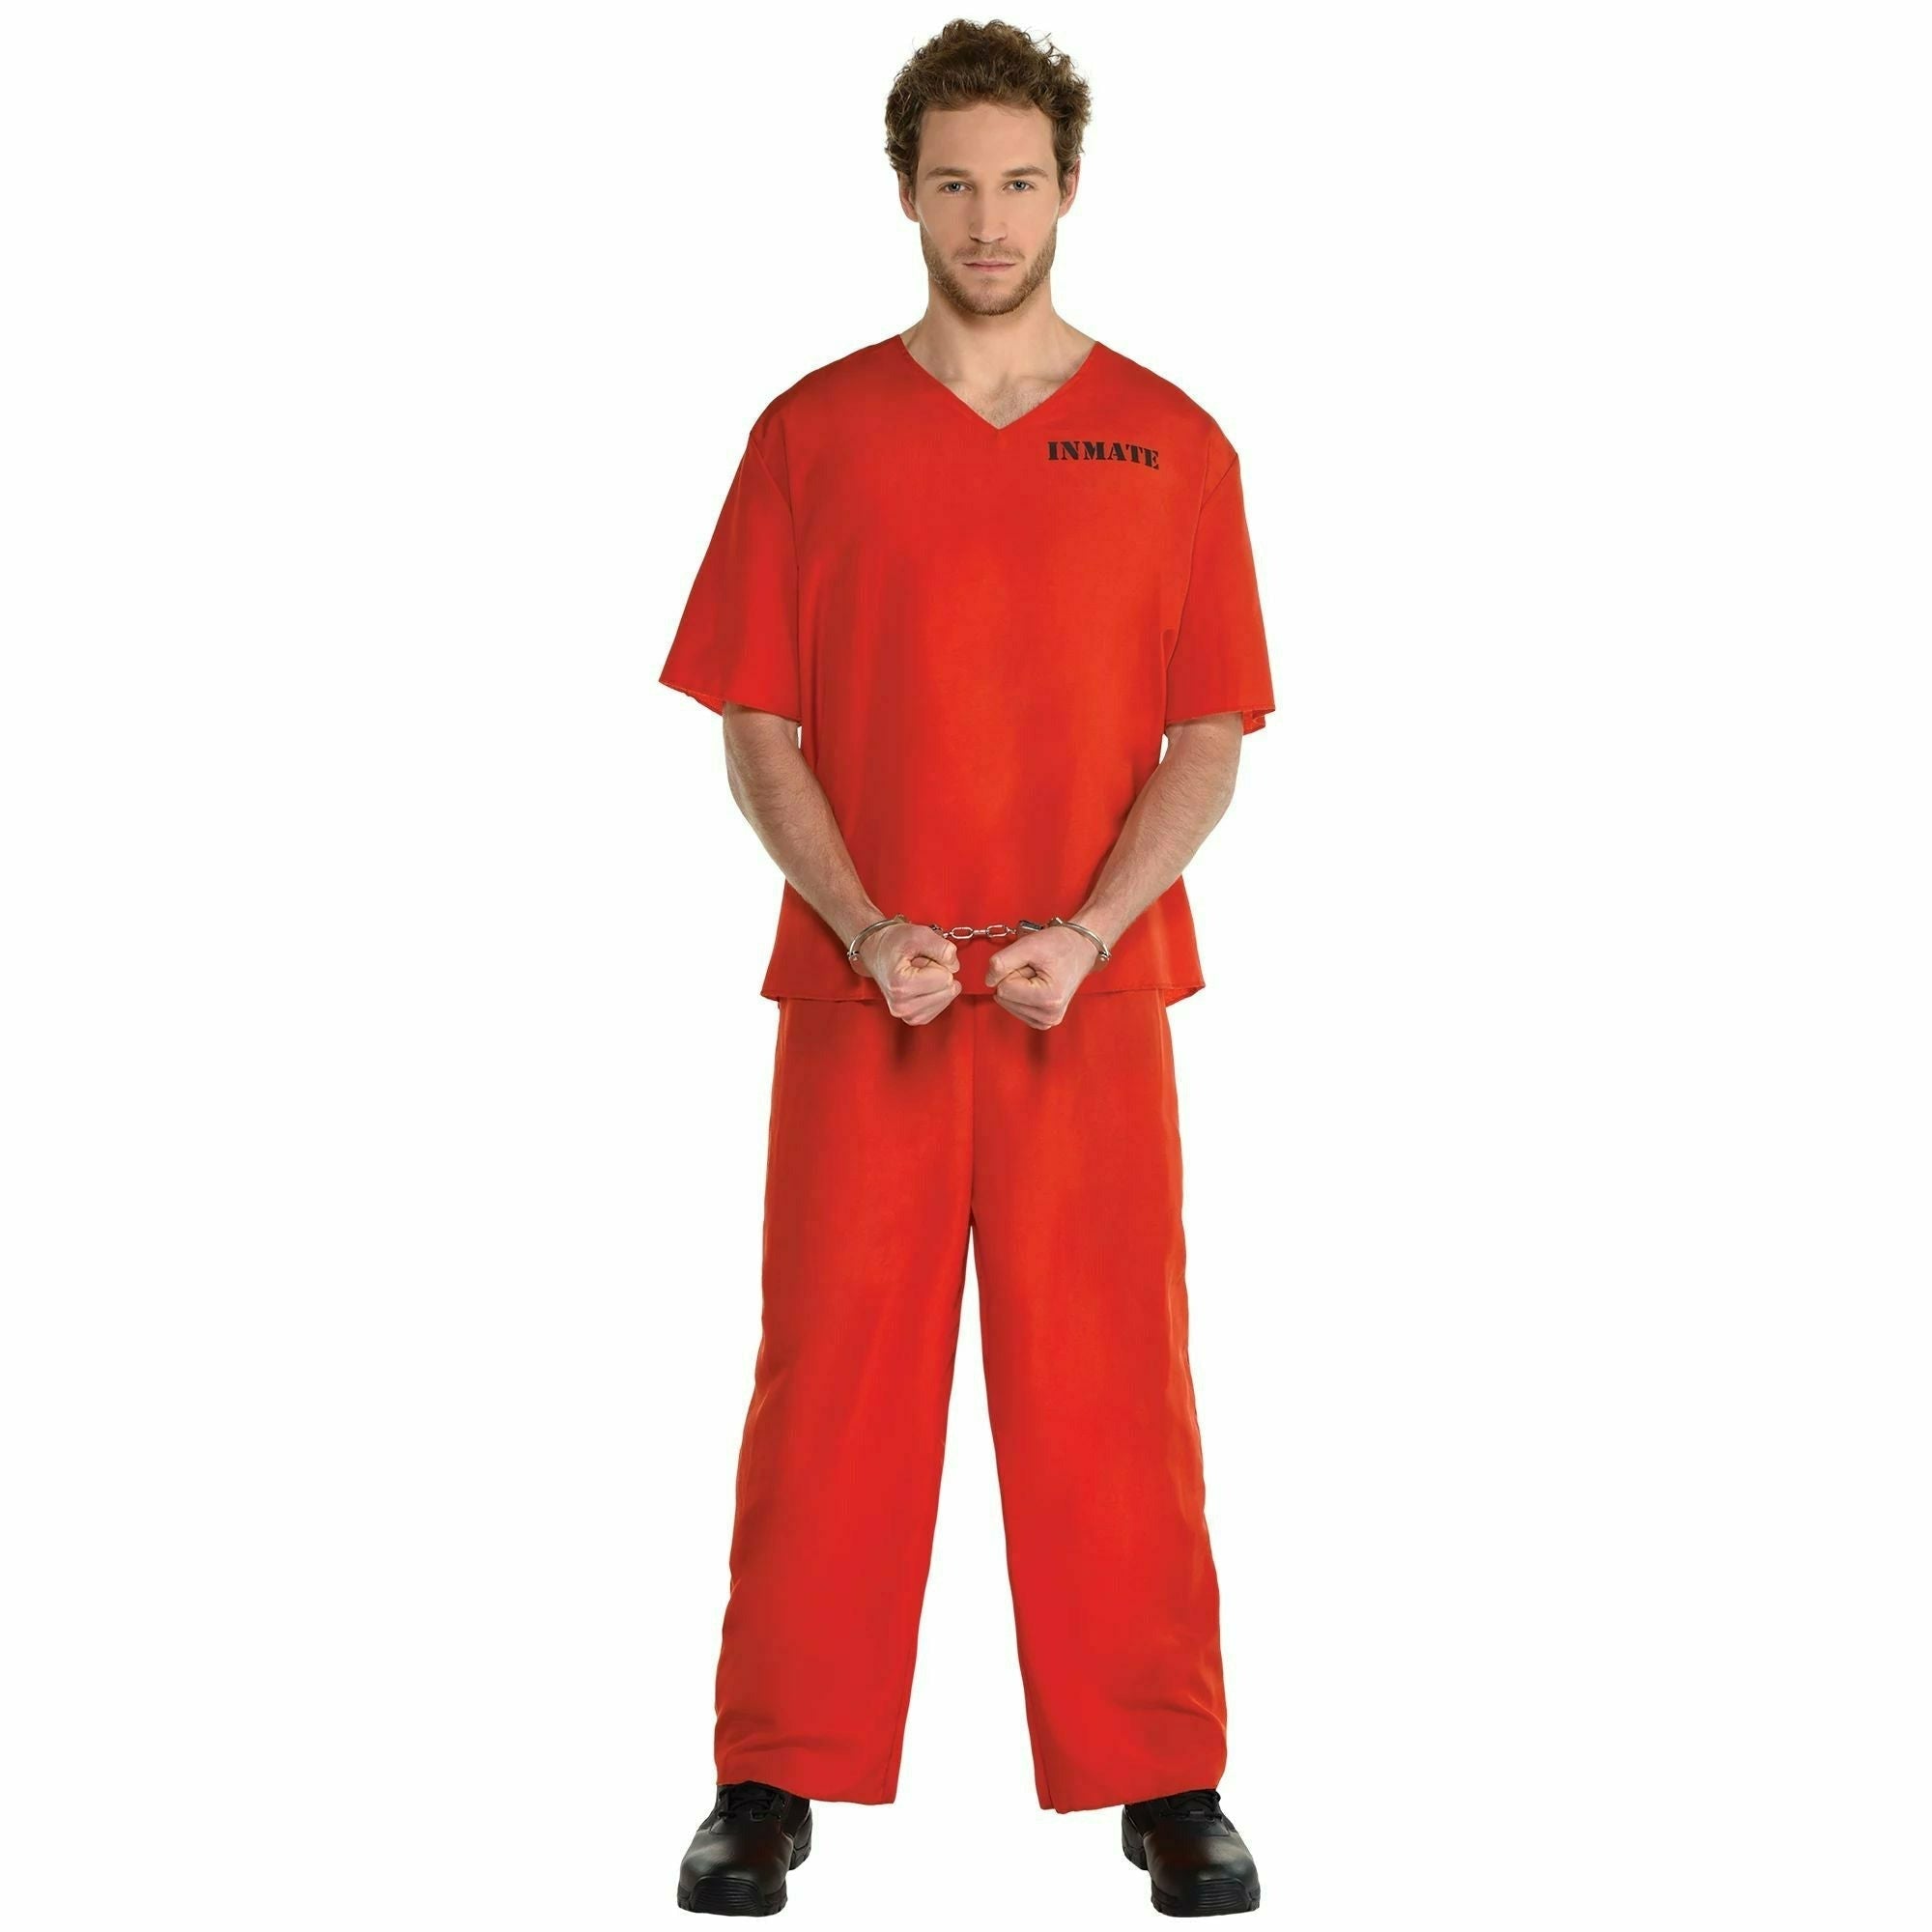 Amscan COSTUMES Standard Incarcerated Adult Costume